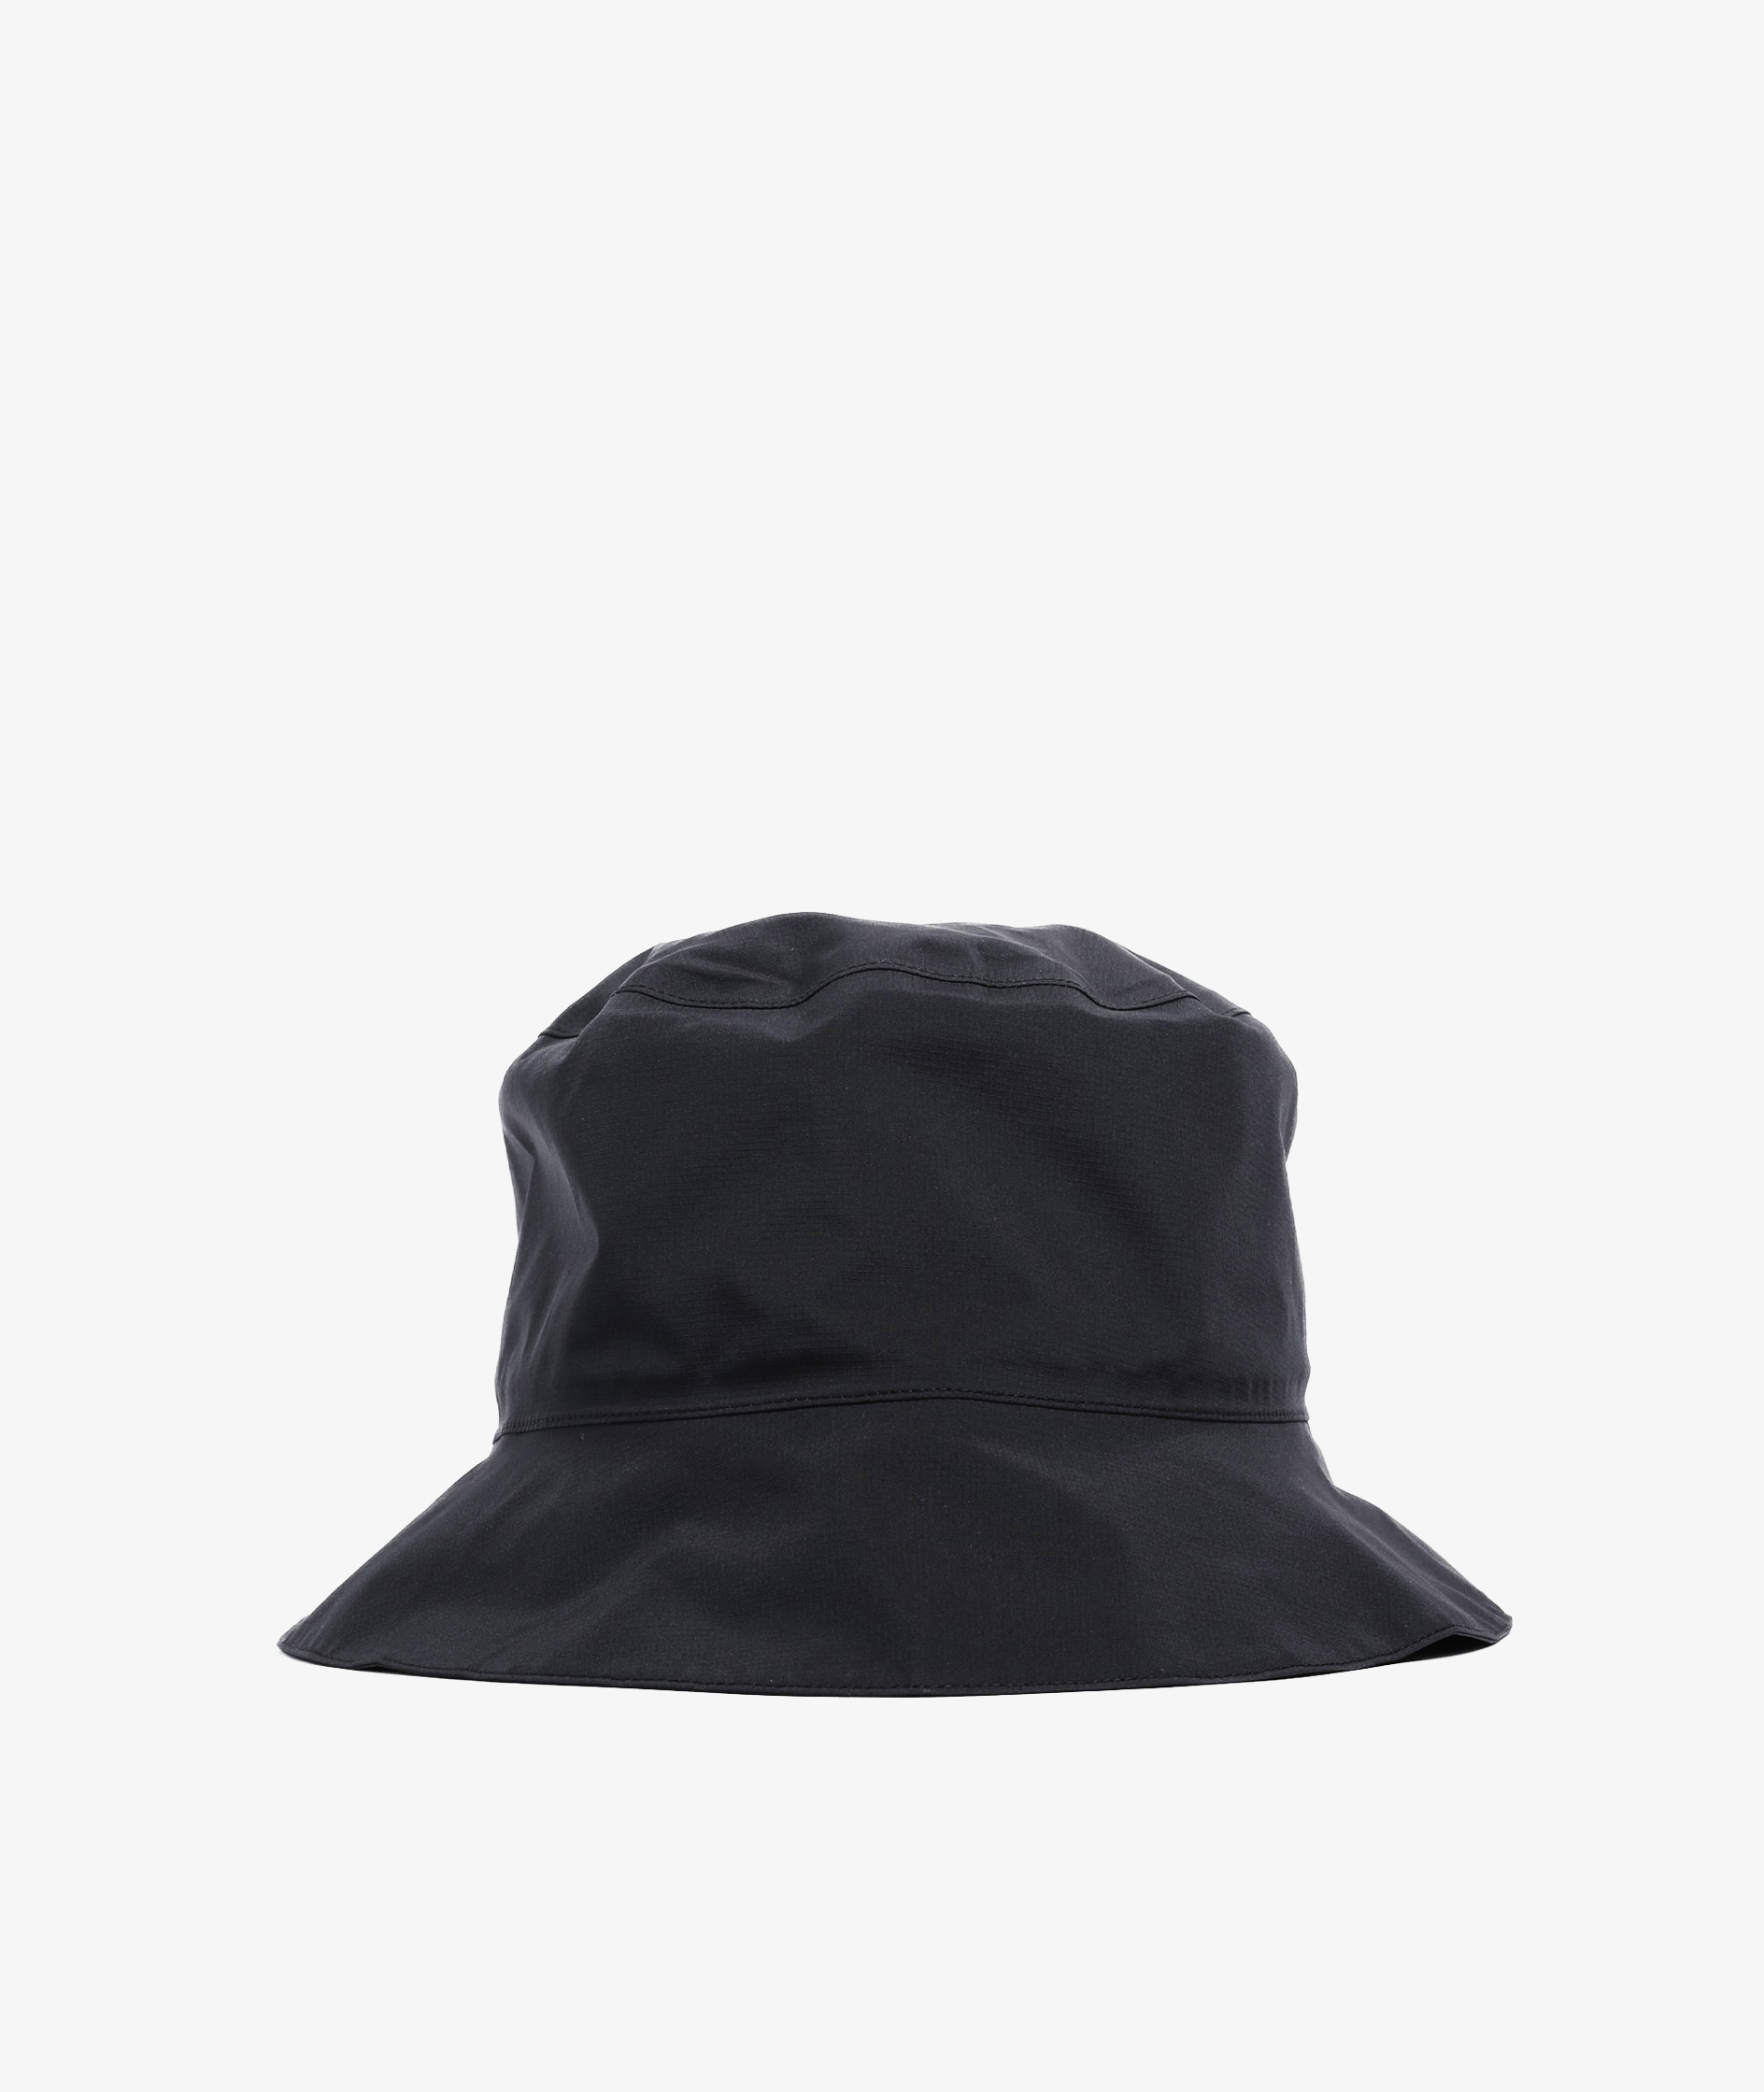 Norse Store | Shipping Worldwide - Acronym FC3-WS - Black